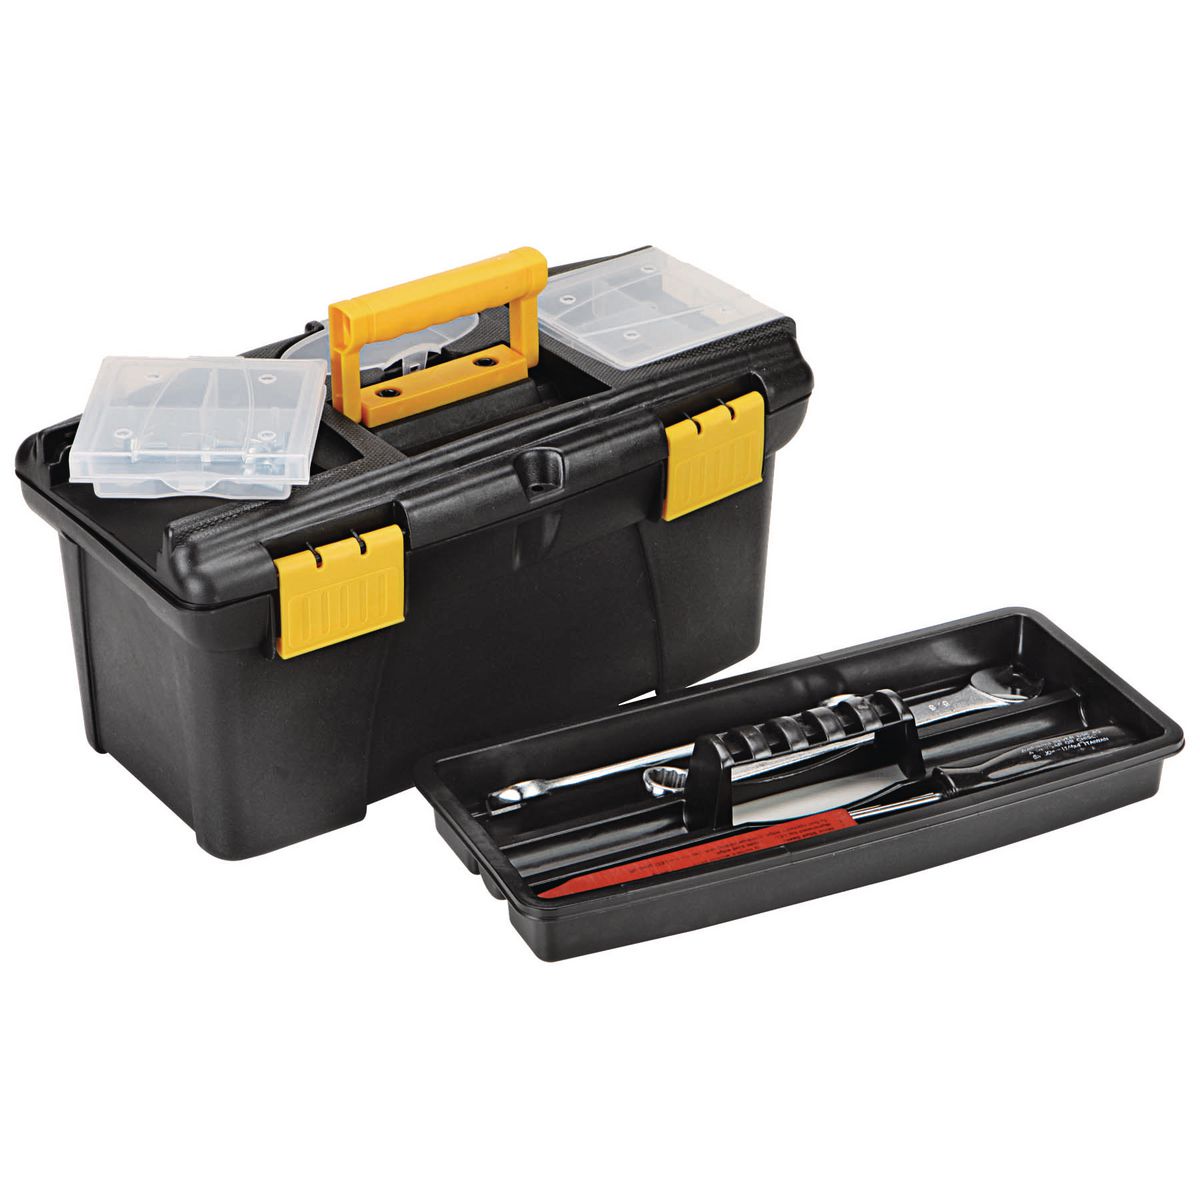 VOYAGER 12 In Toolbox with Top Tray - Item 96602